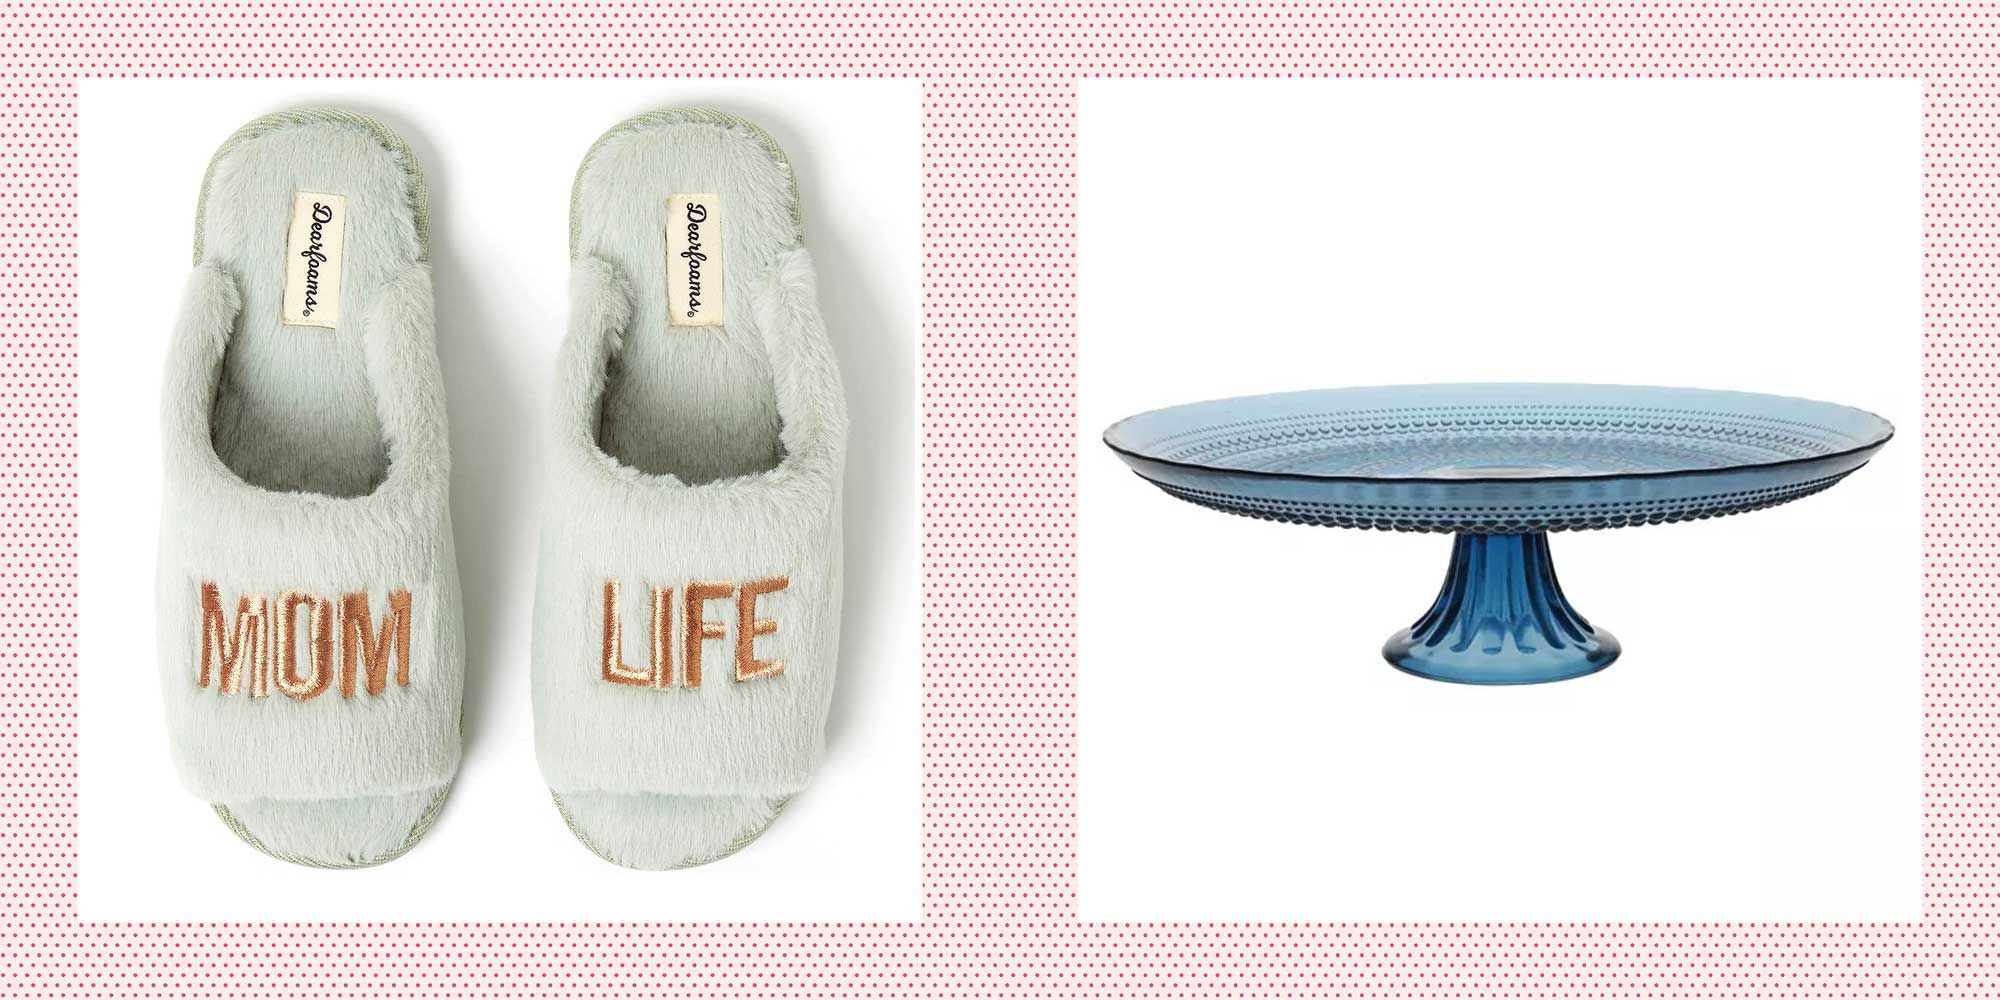 50 First Mother's Day Gift Ideas for New Moms - Parade